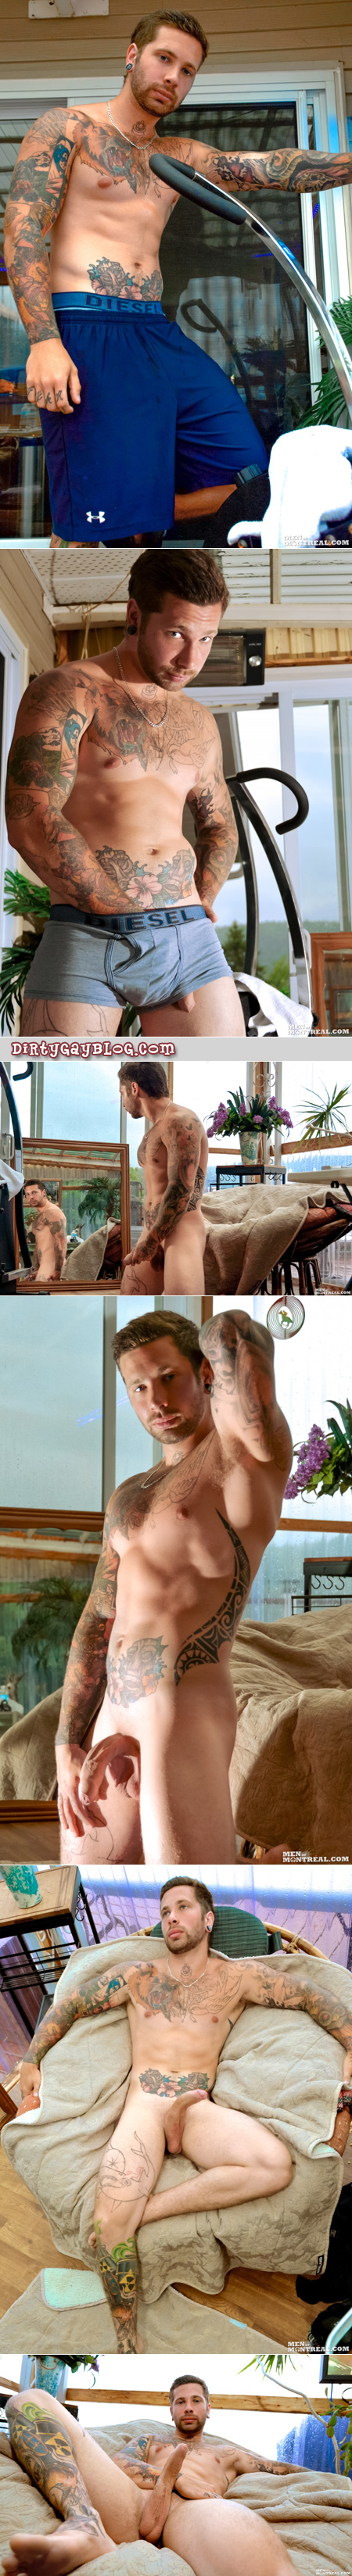 Heavily tattooed, uncut Canadian guy jacks off in the furnished utility shed.